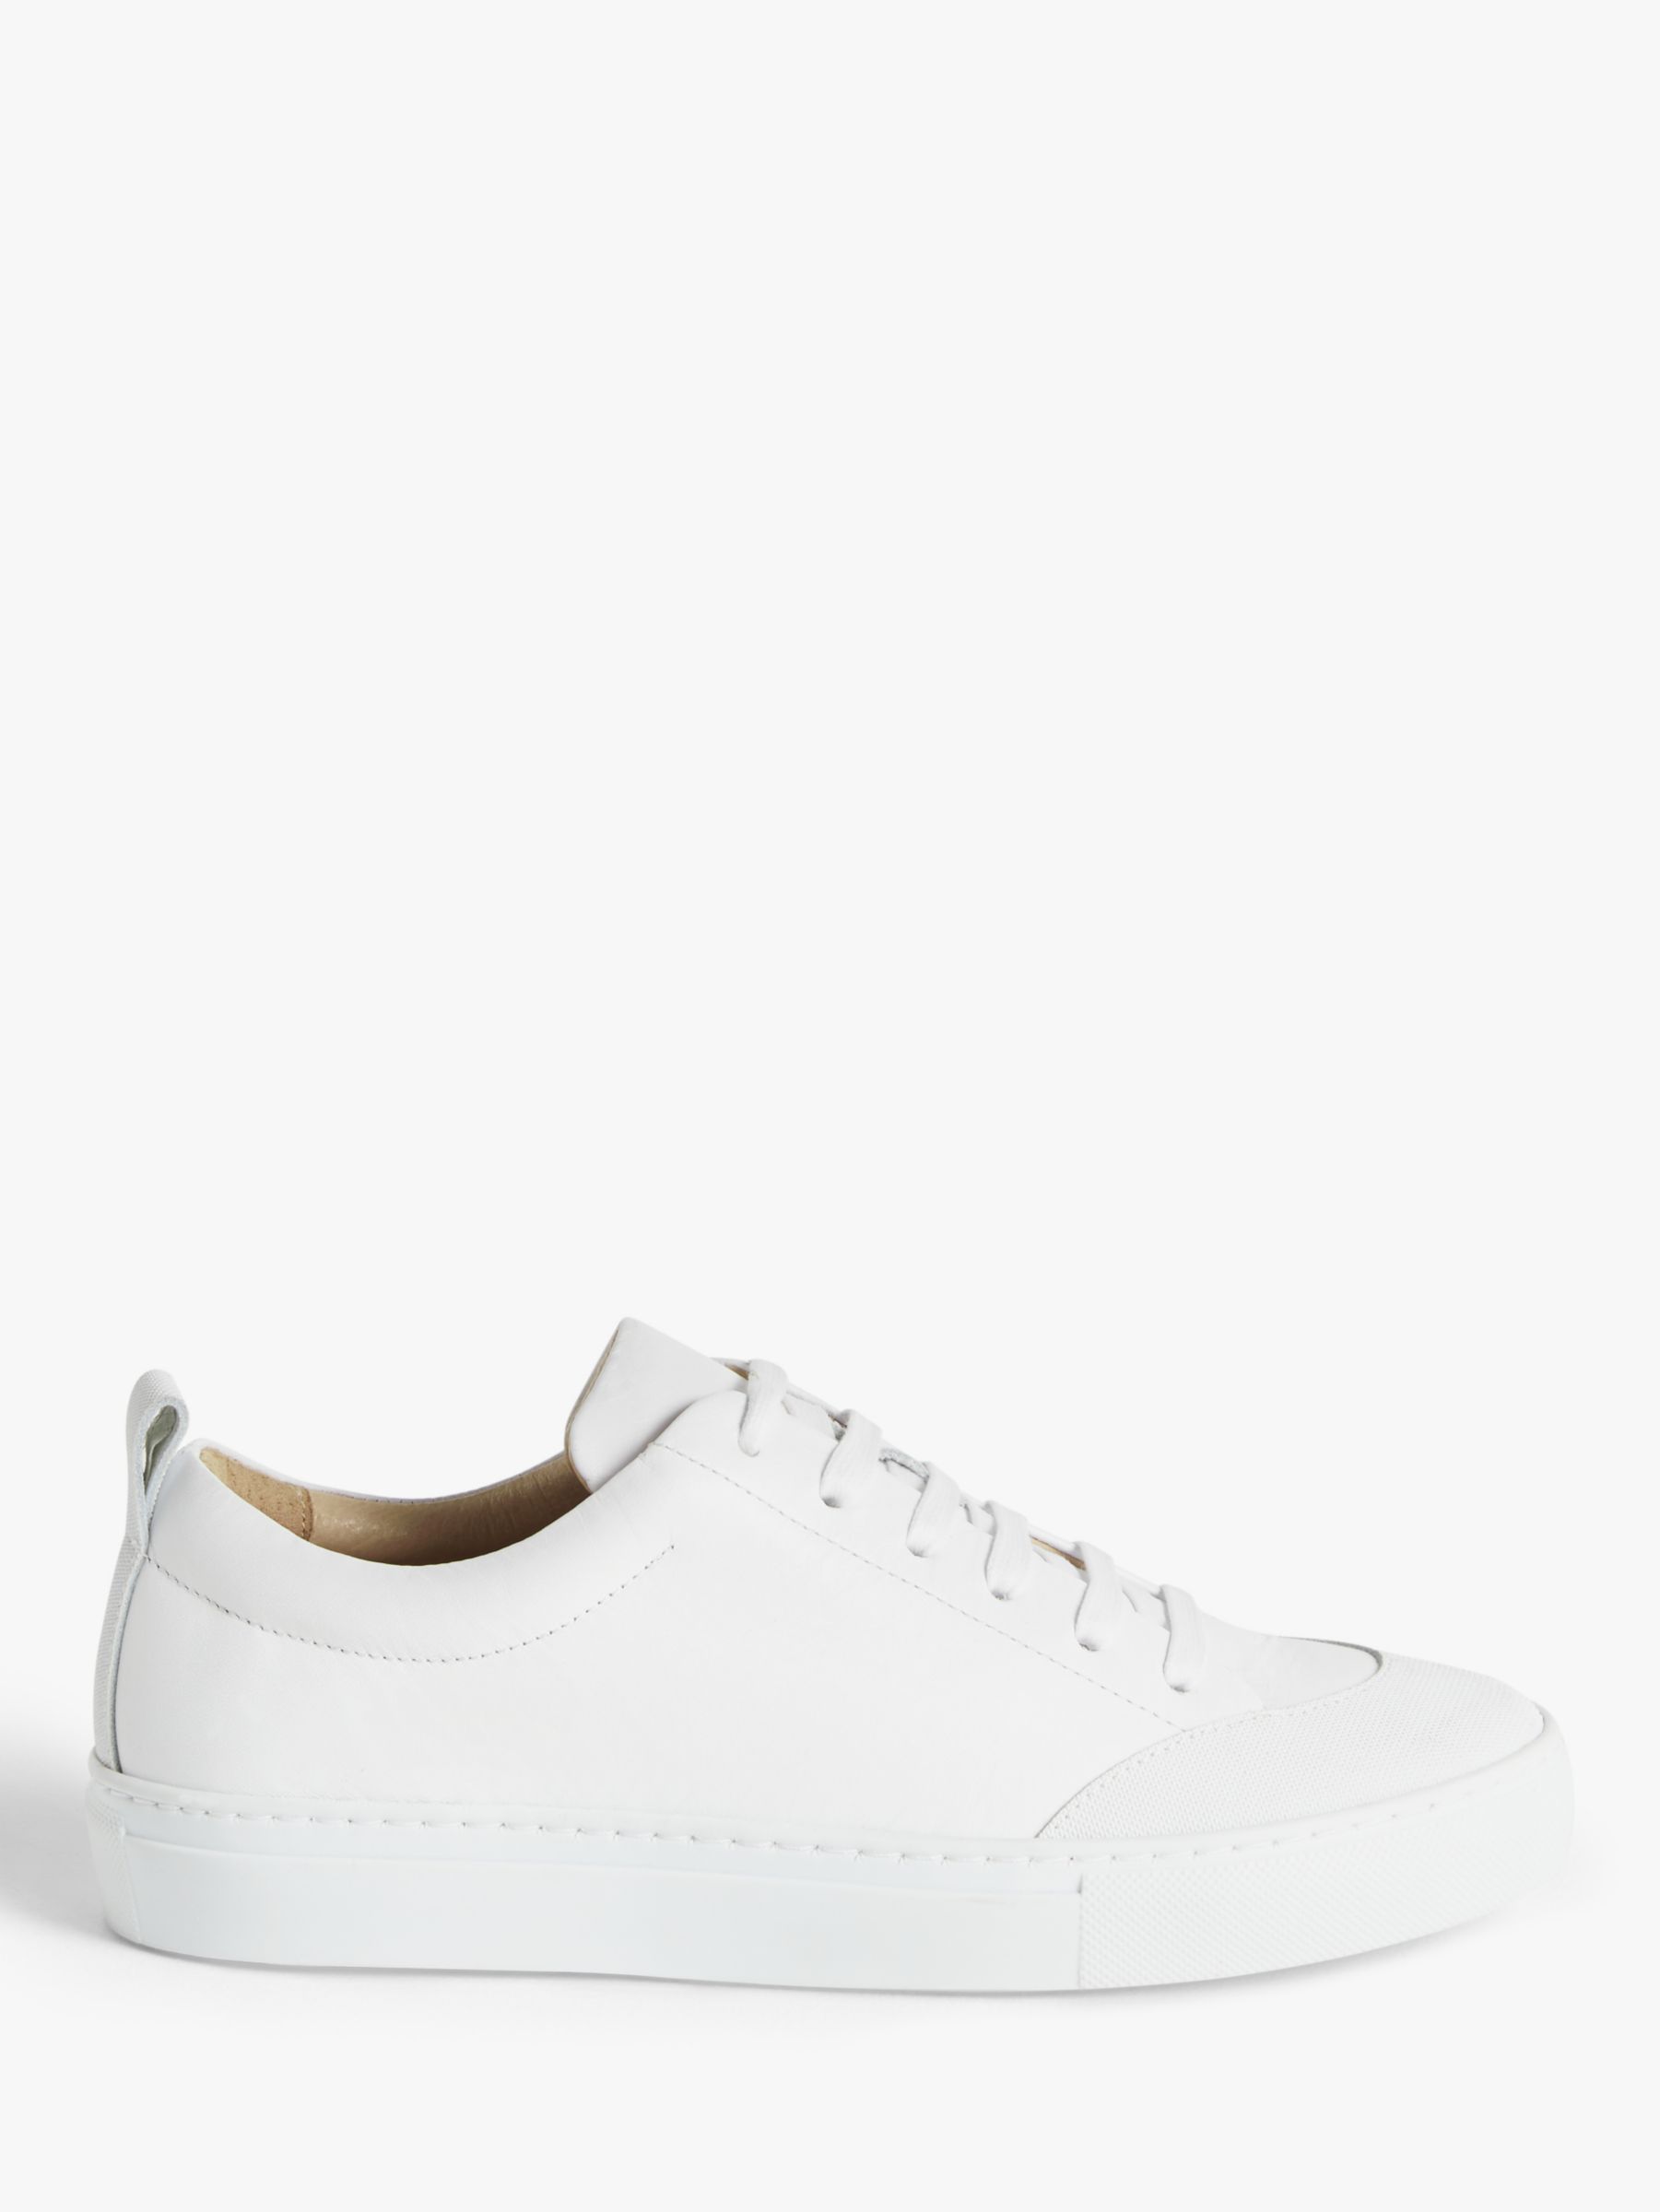 John Lewis & Partners Felicity Leather Trainers, White at John Lewis ...